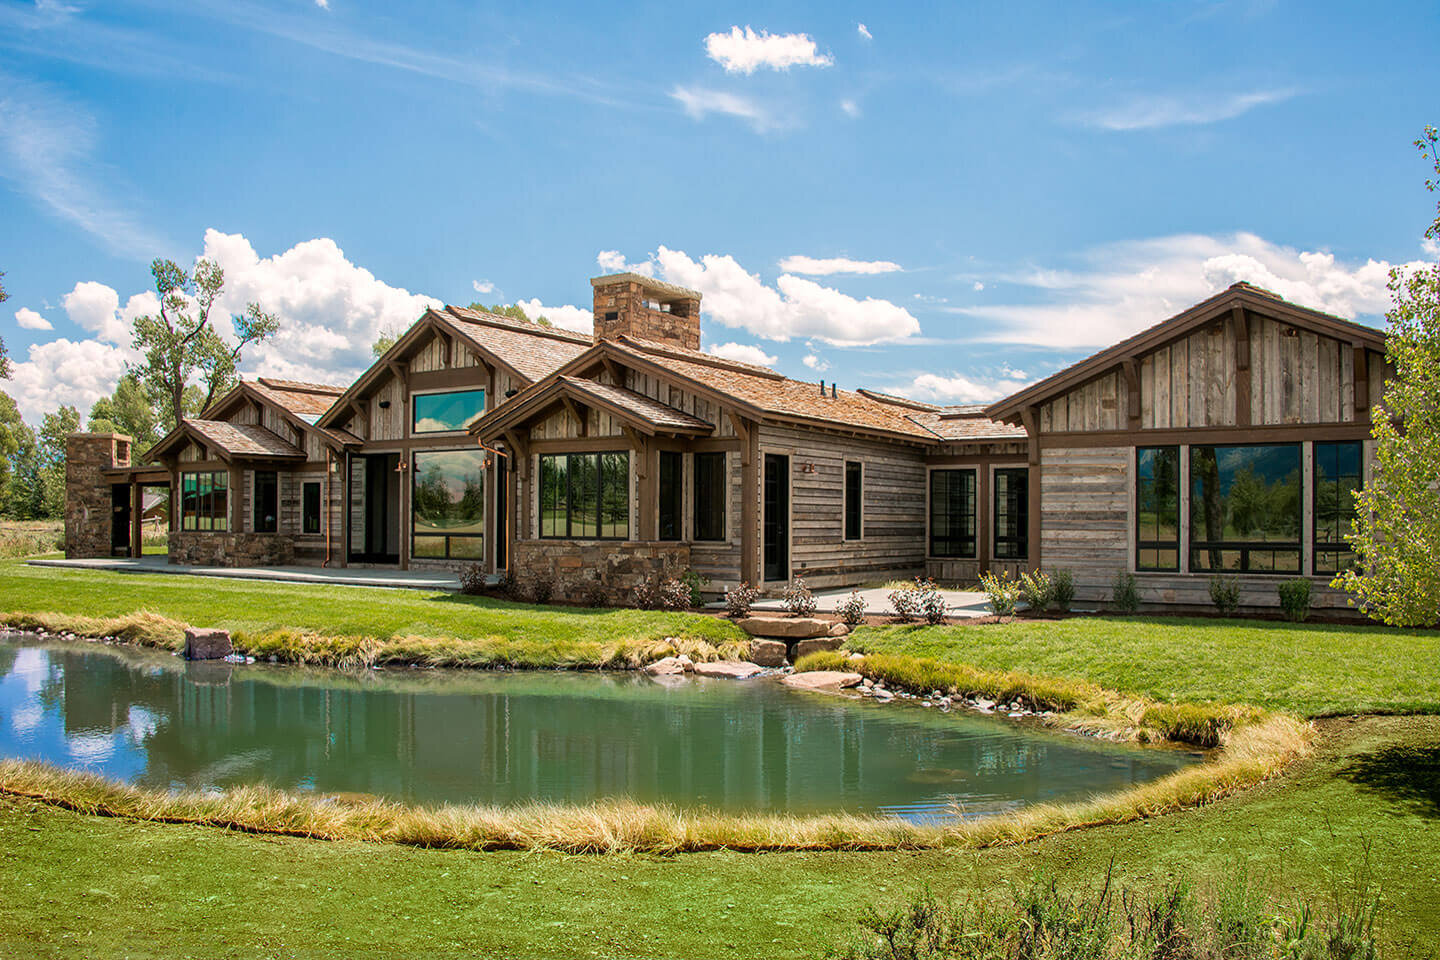 Reclaimed wood home facade and pond